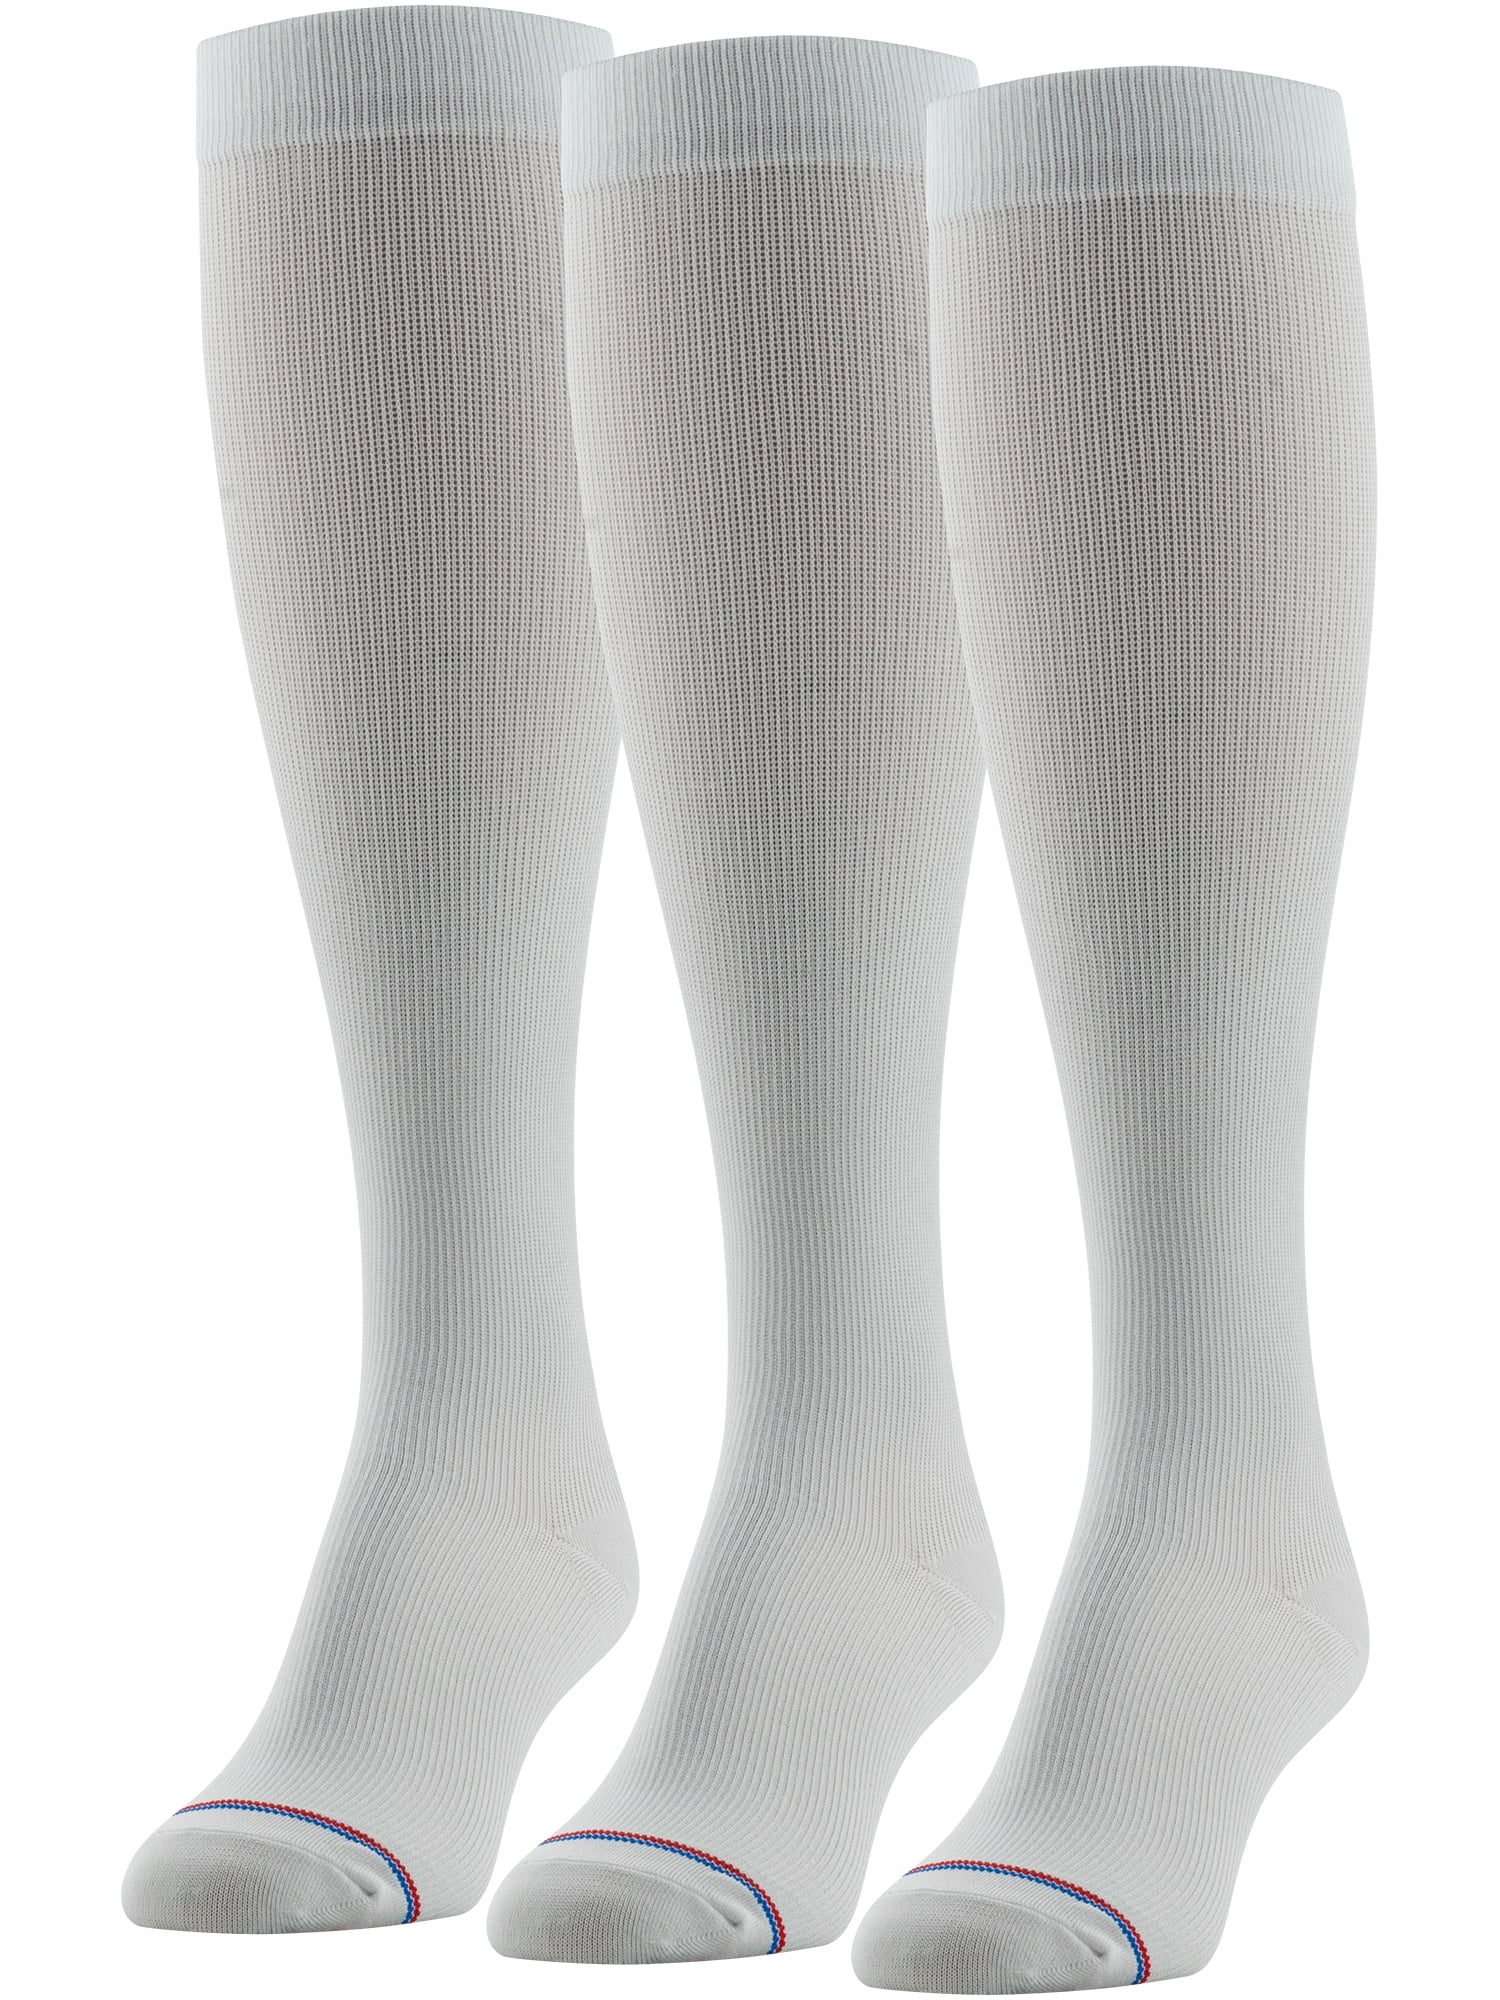 Medipeds Womens Over the Calf Support Socks, 3 Pairs - Walmart.com